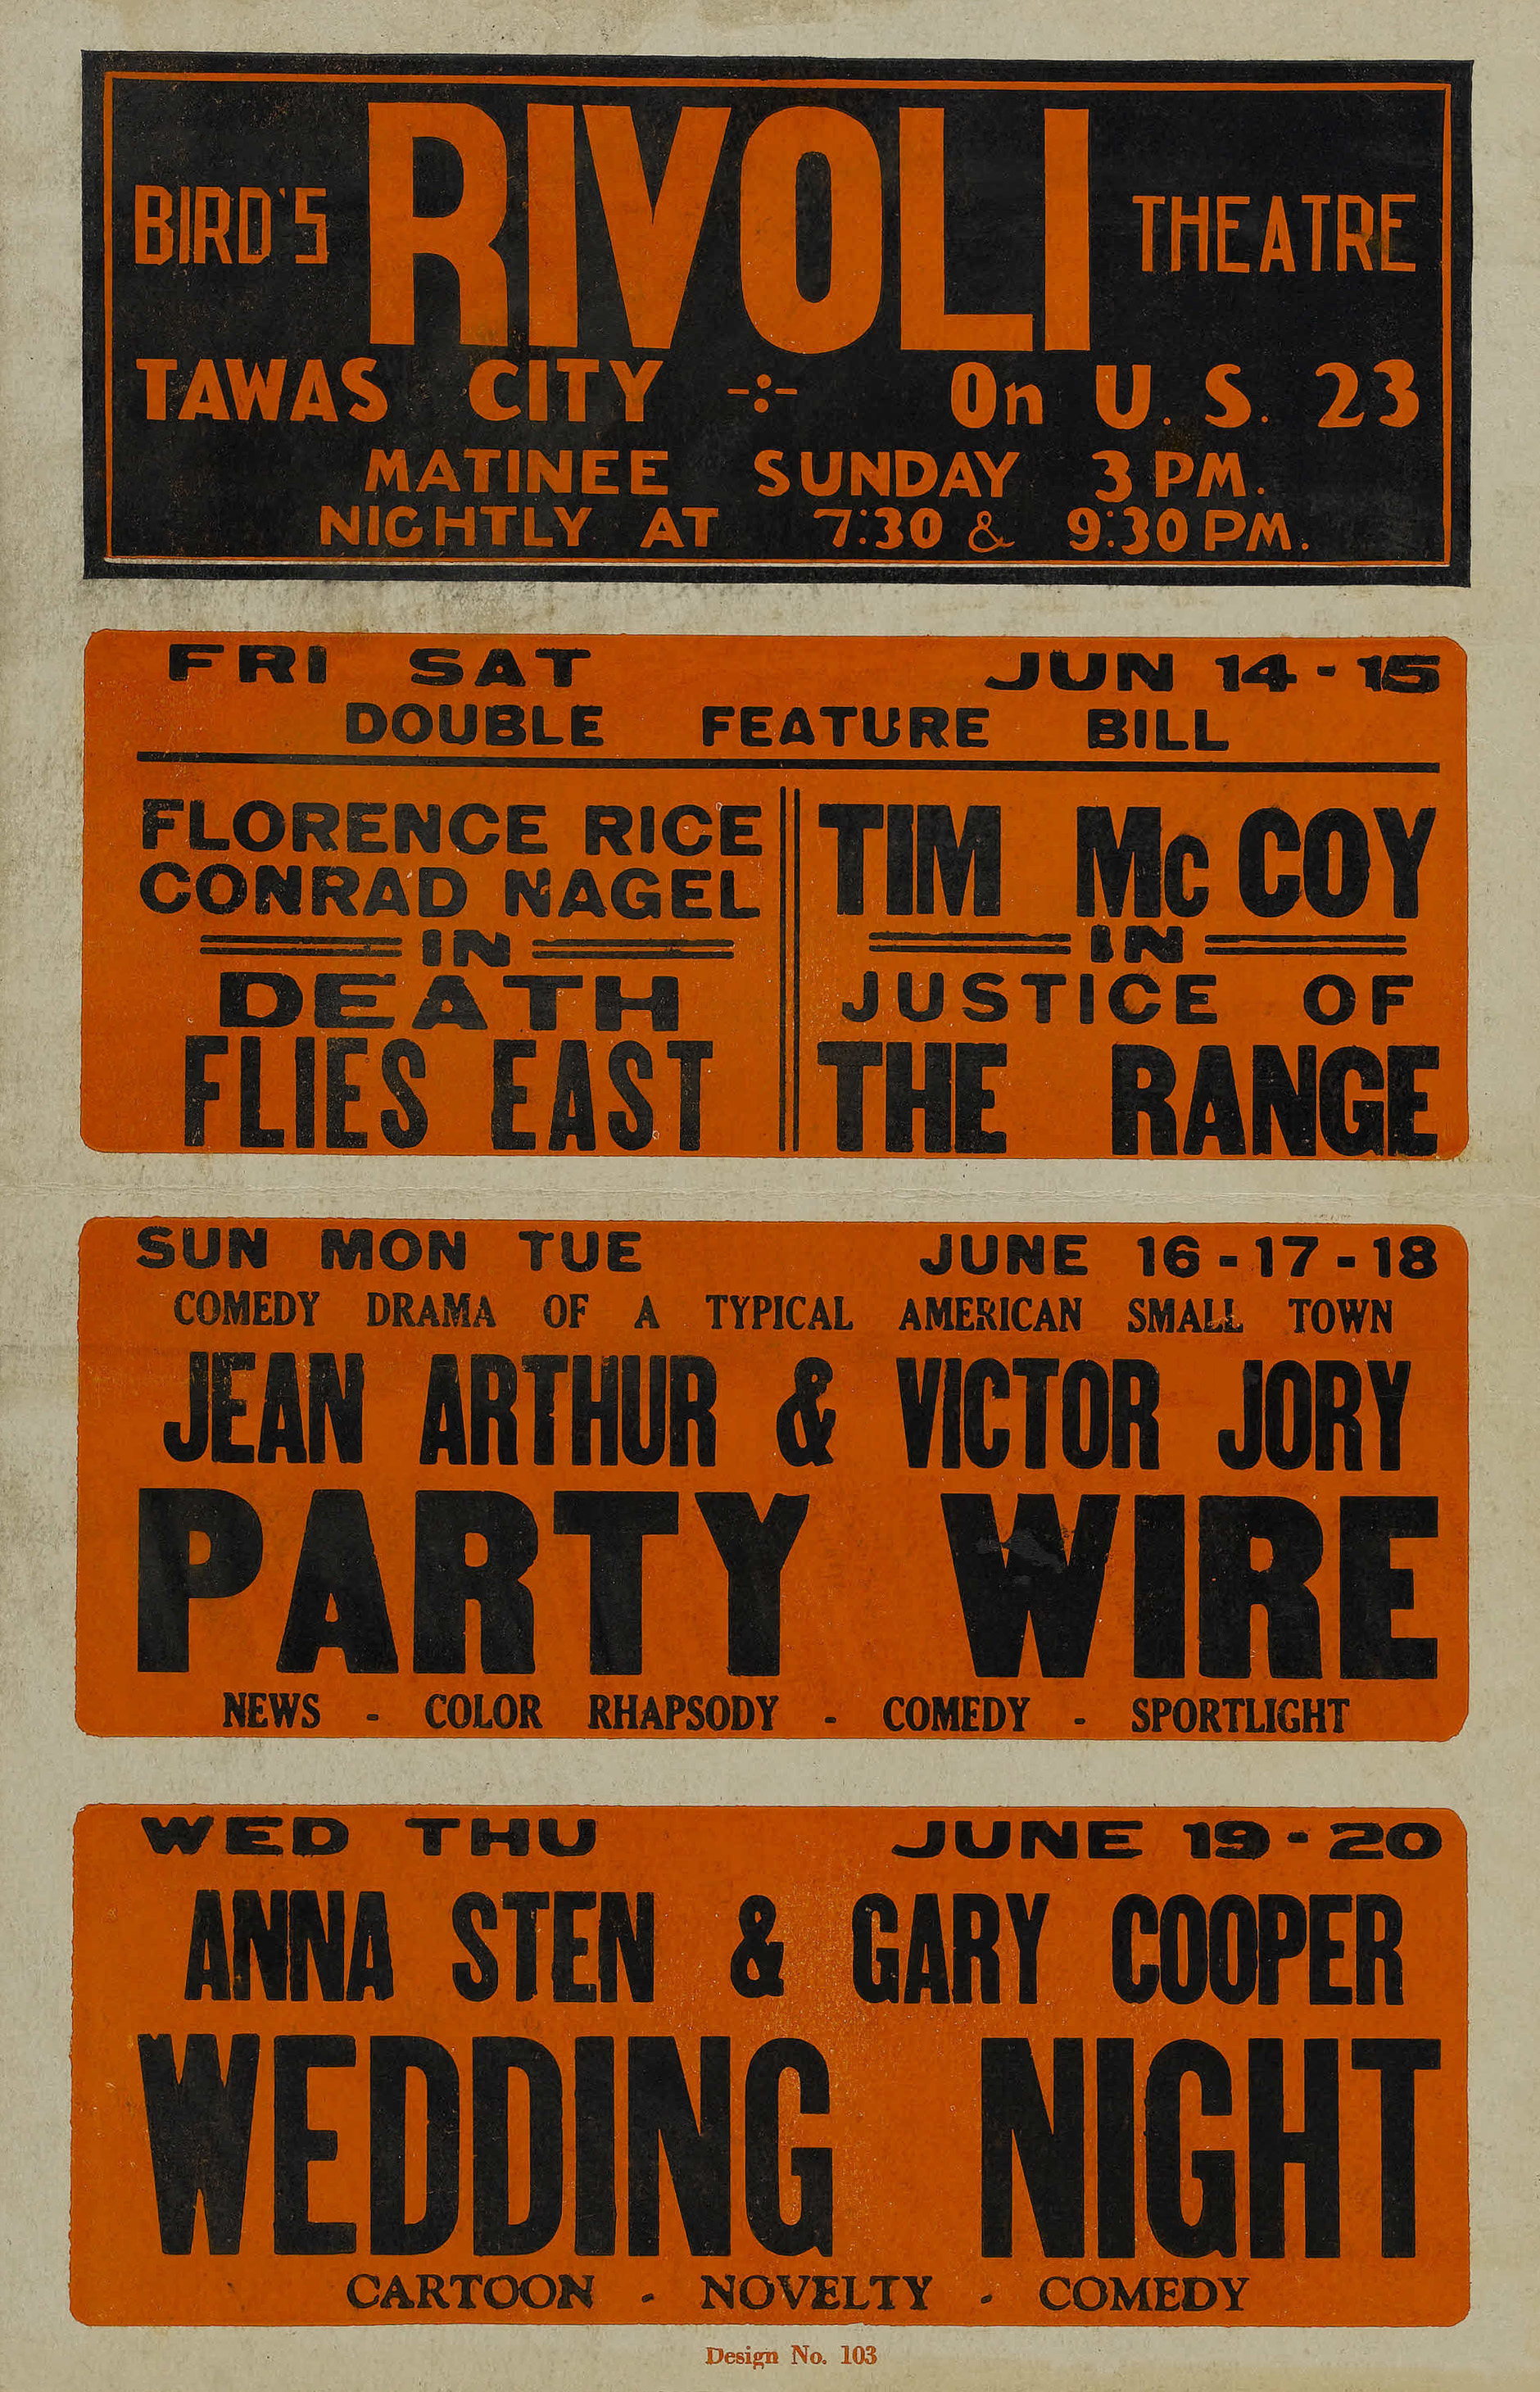 Party Wire (1935) Screenshot 2